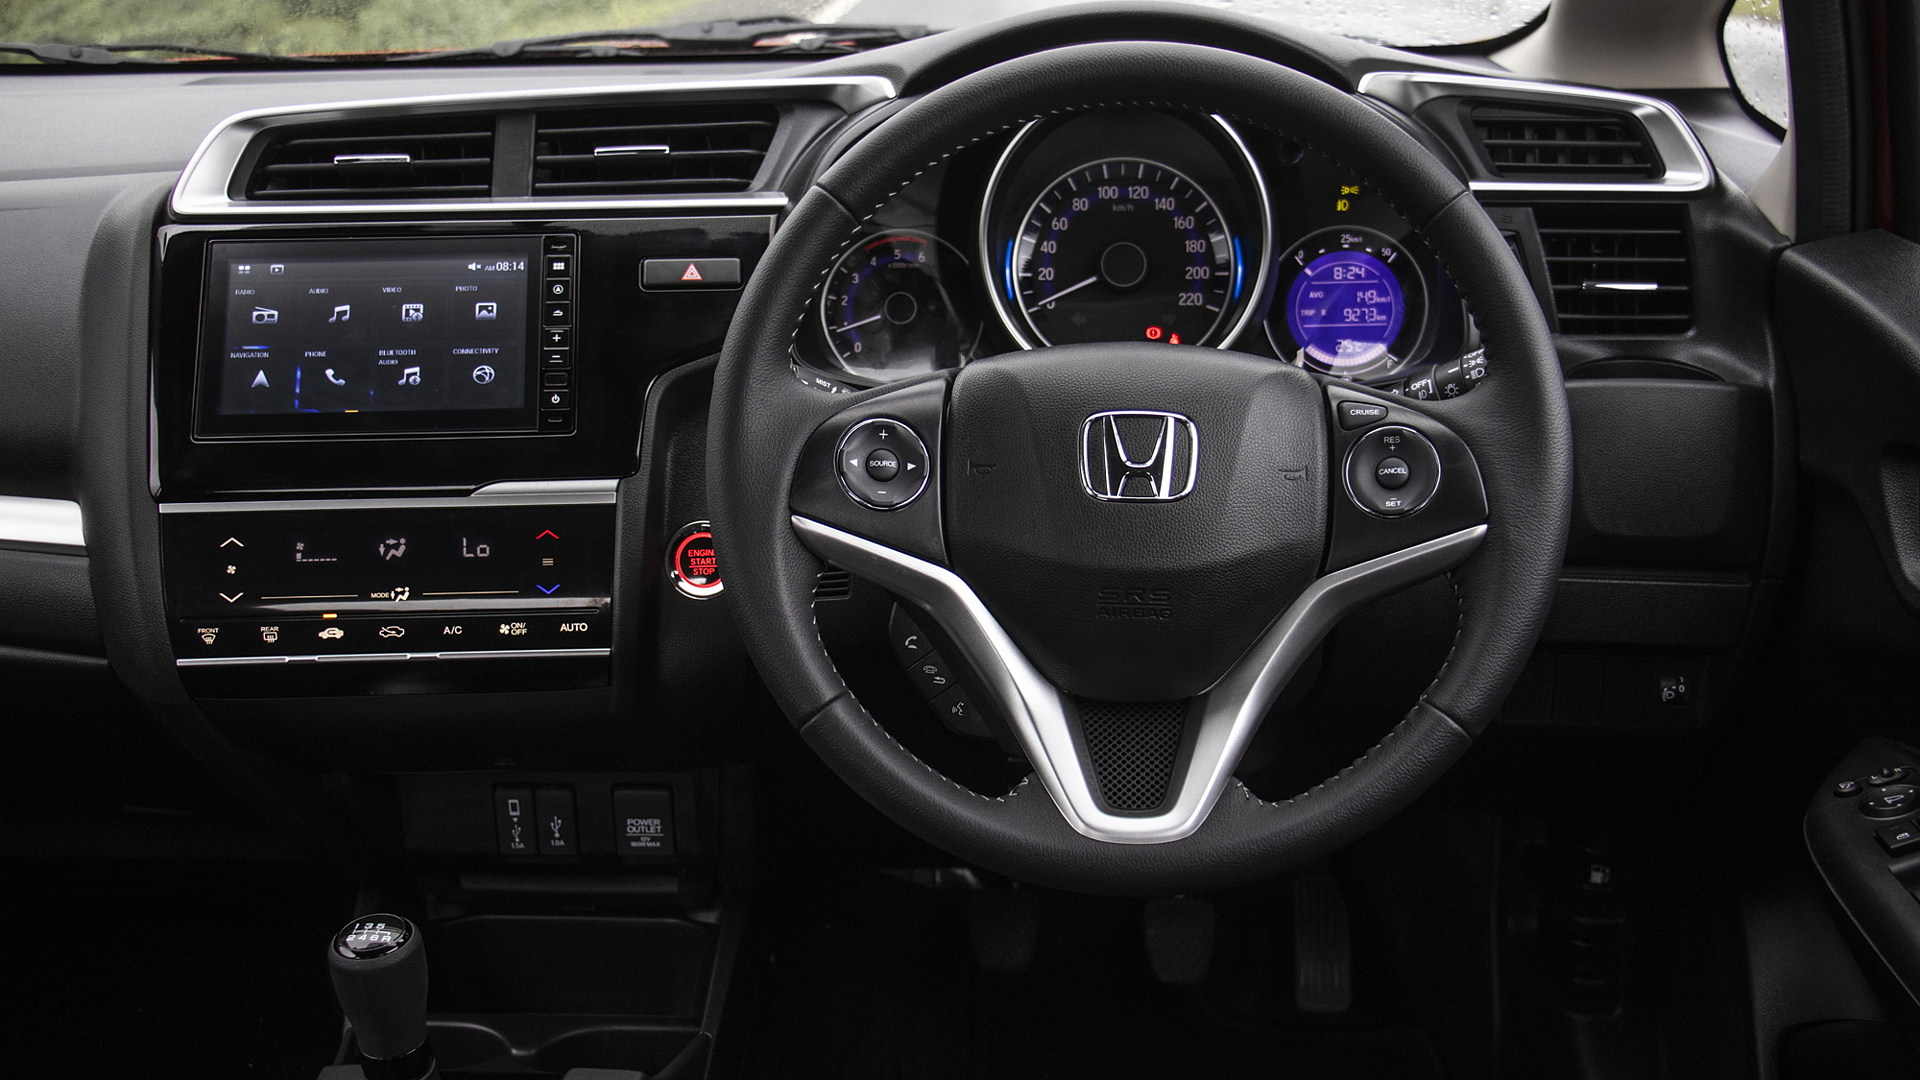 Honda Wr V Vx Mt Petrol Price In India Features Specs And Reviews Carwale